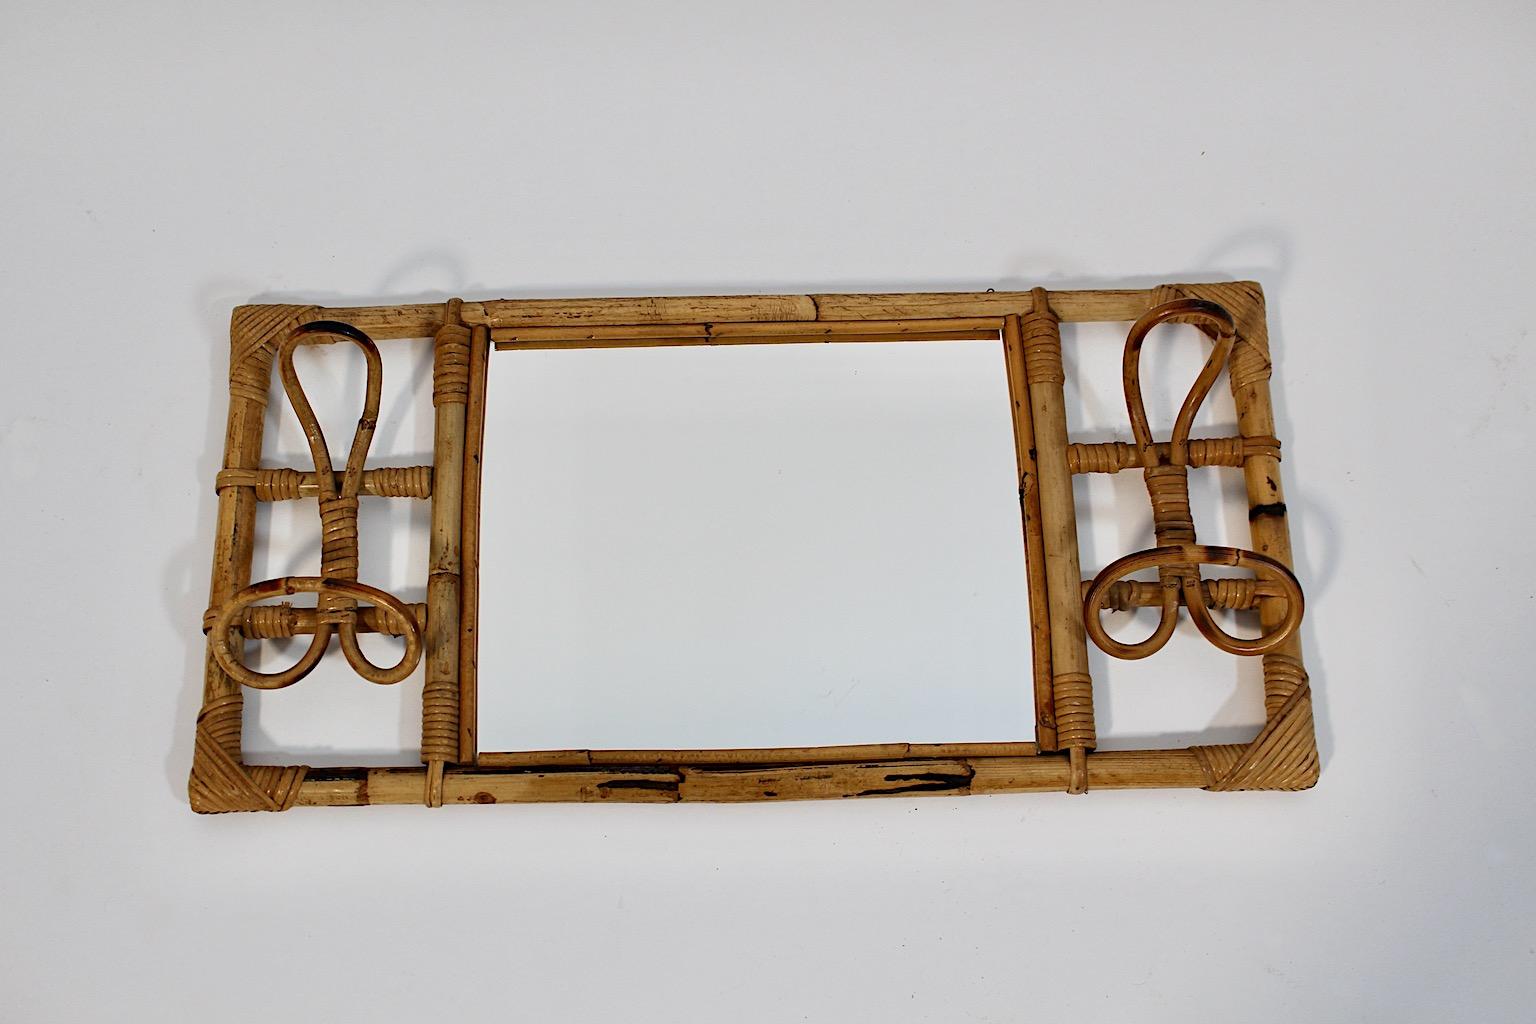 Riviera Style vintage organic bamboo rattan wall mirror with two ( 2 ) coat hooks 1950s Italy.
A stunning organic wall mirror rectangular like with coat hooks in beautiful brown color.
While the rattan frame is carefully cleaned, the mirror glass